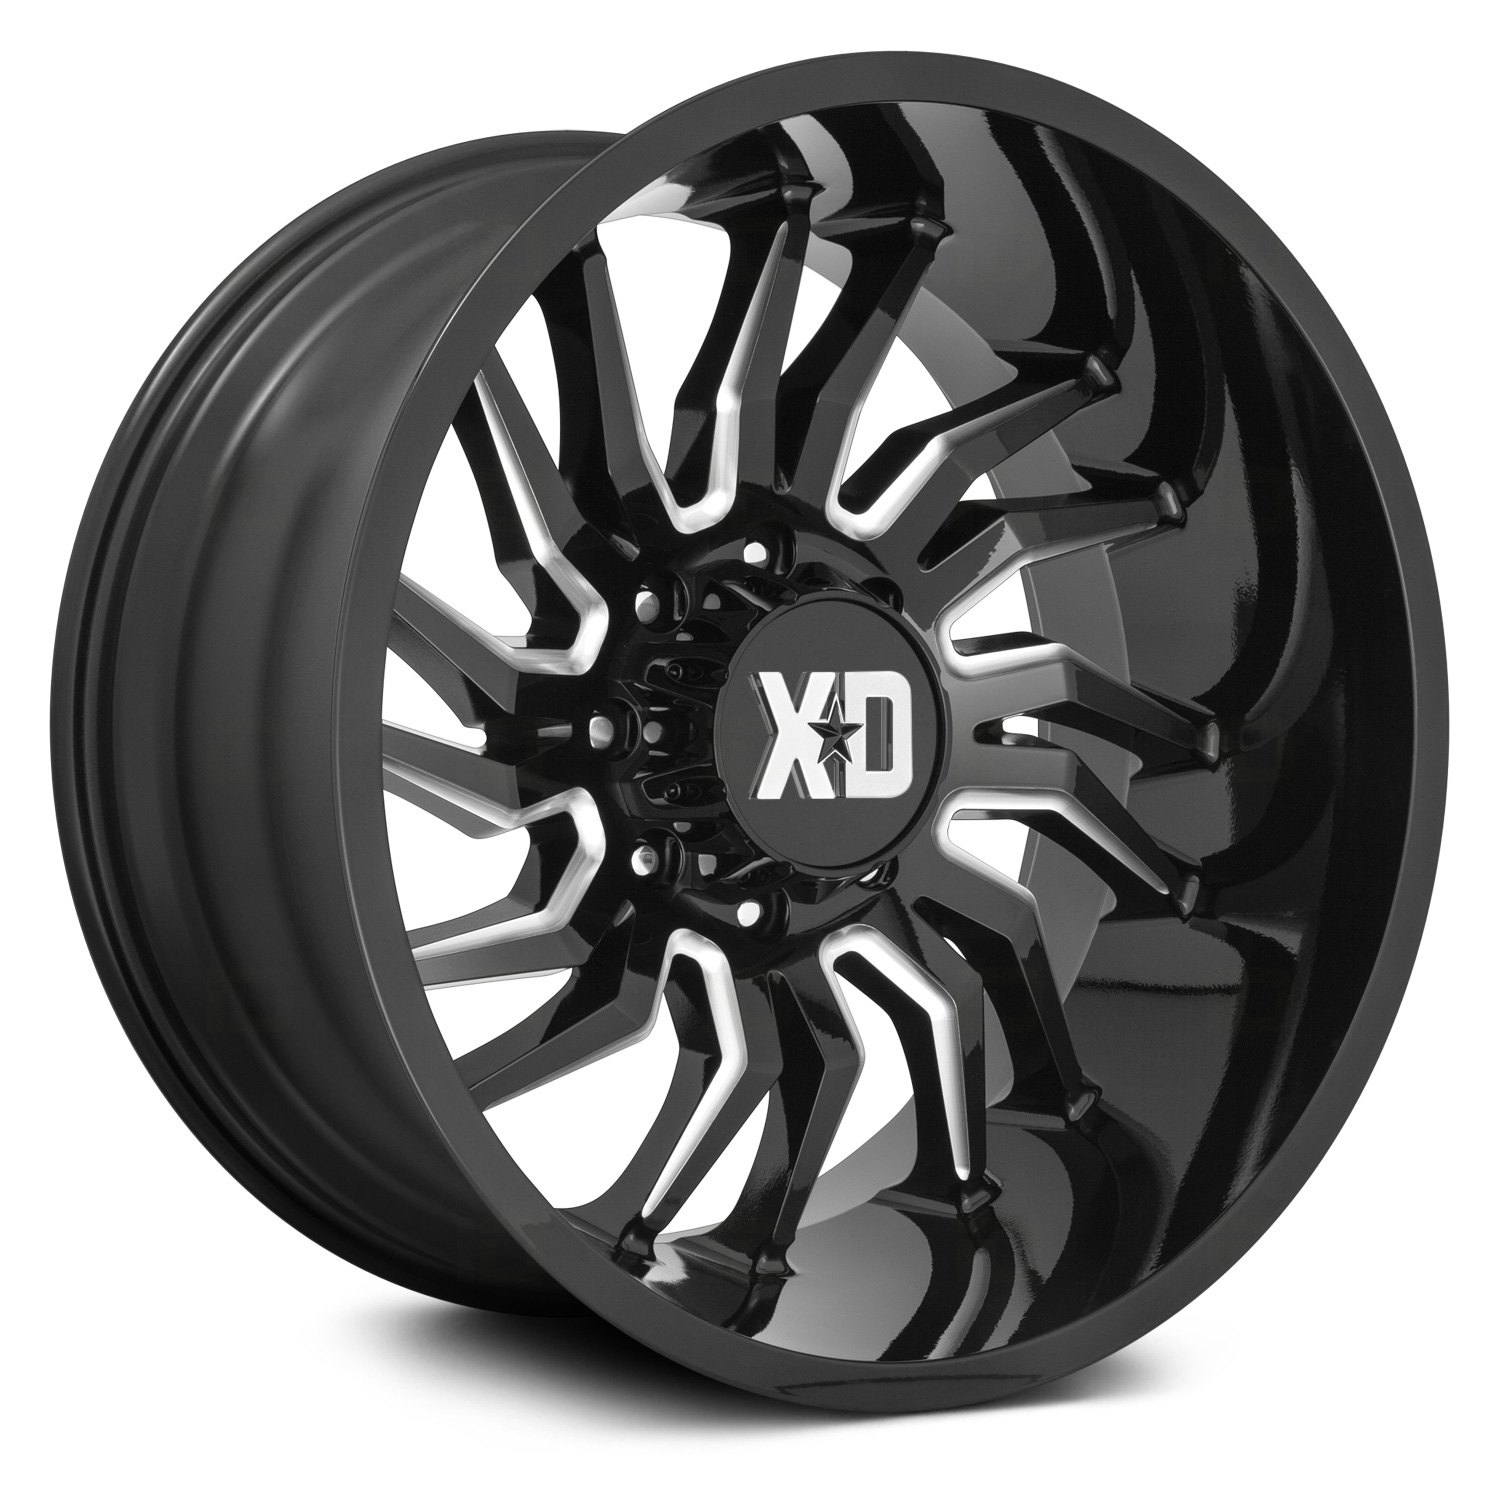 XD SERIES® XD858 TENSION Wheels - Gloss Black with Milled Accents 